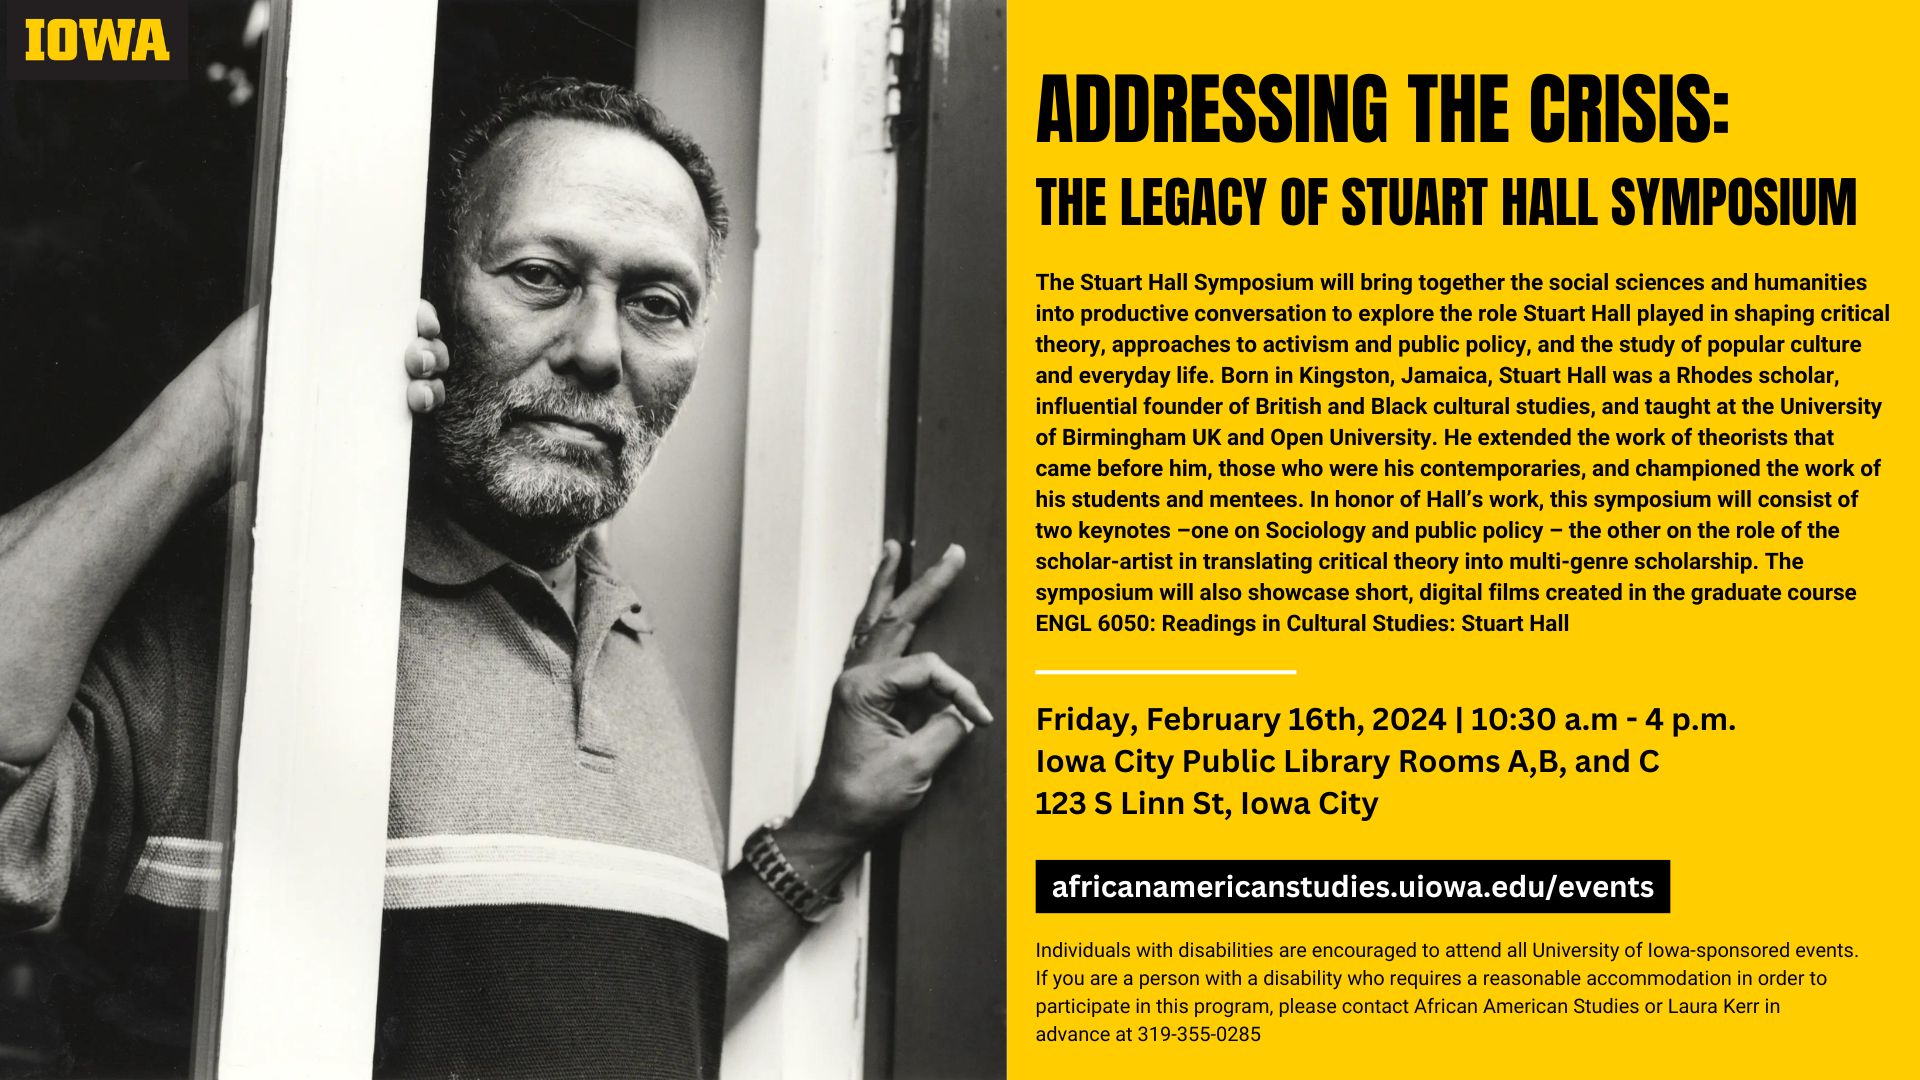 Addressing the Crisis: The Legacy of Stuart Hall Symposium. Friday, February 16th, 2024 at 10:30am-4pm